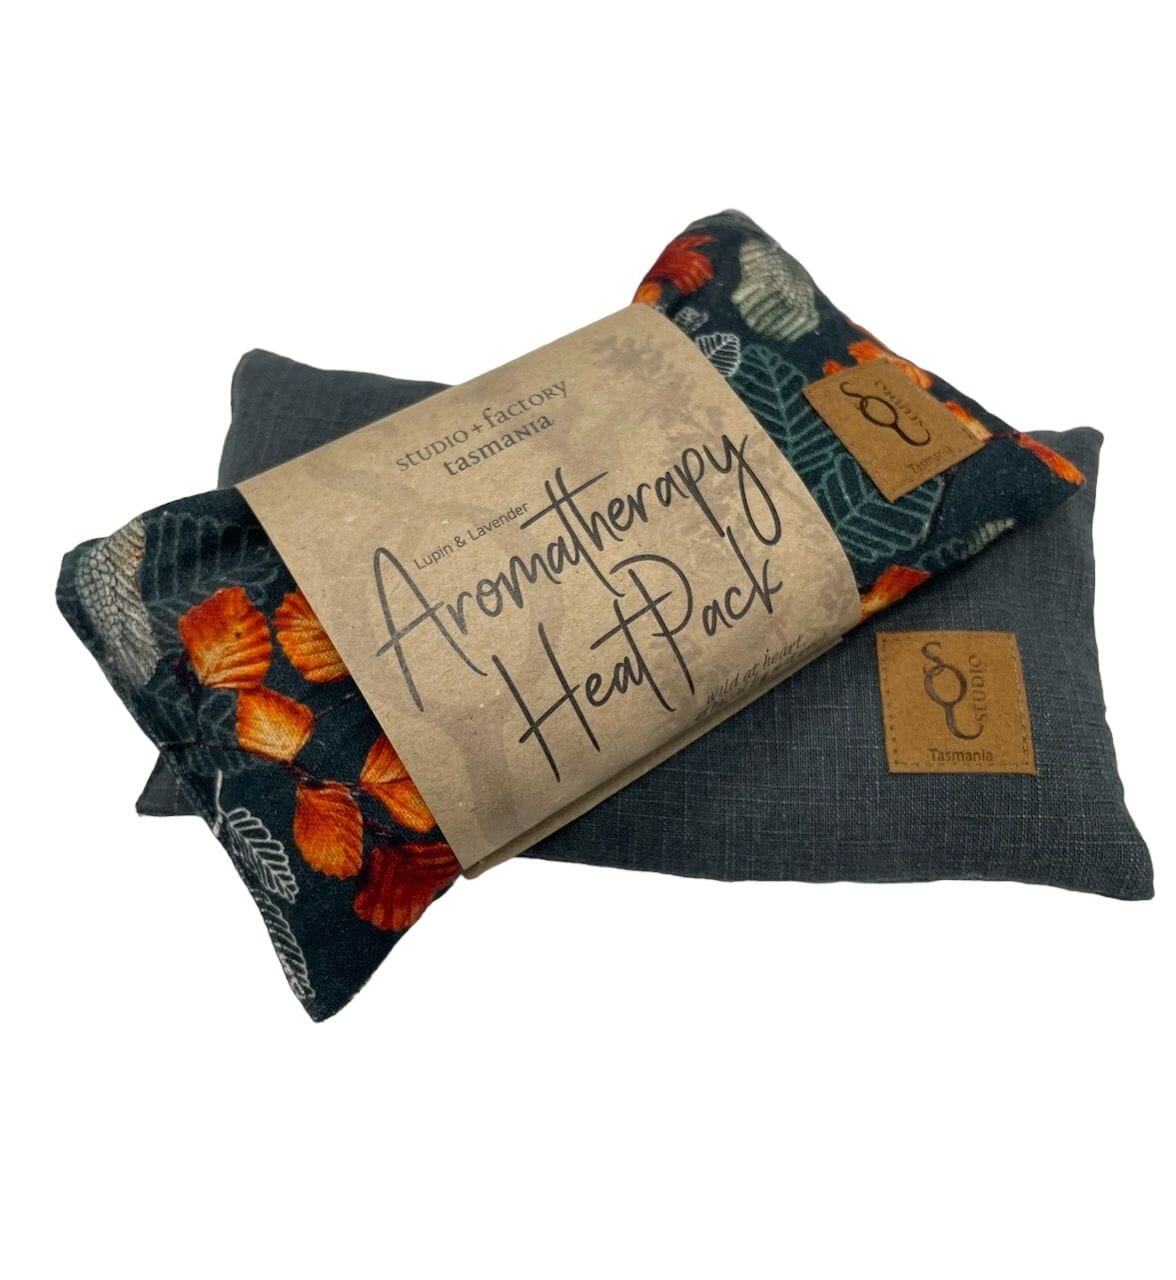 Aromatherapy Heat/Cold pack - Lupin & Lavender Heating Pads The Spotted Quoll Double Trouble Fagus / Slate Slub 